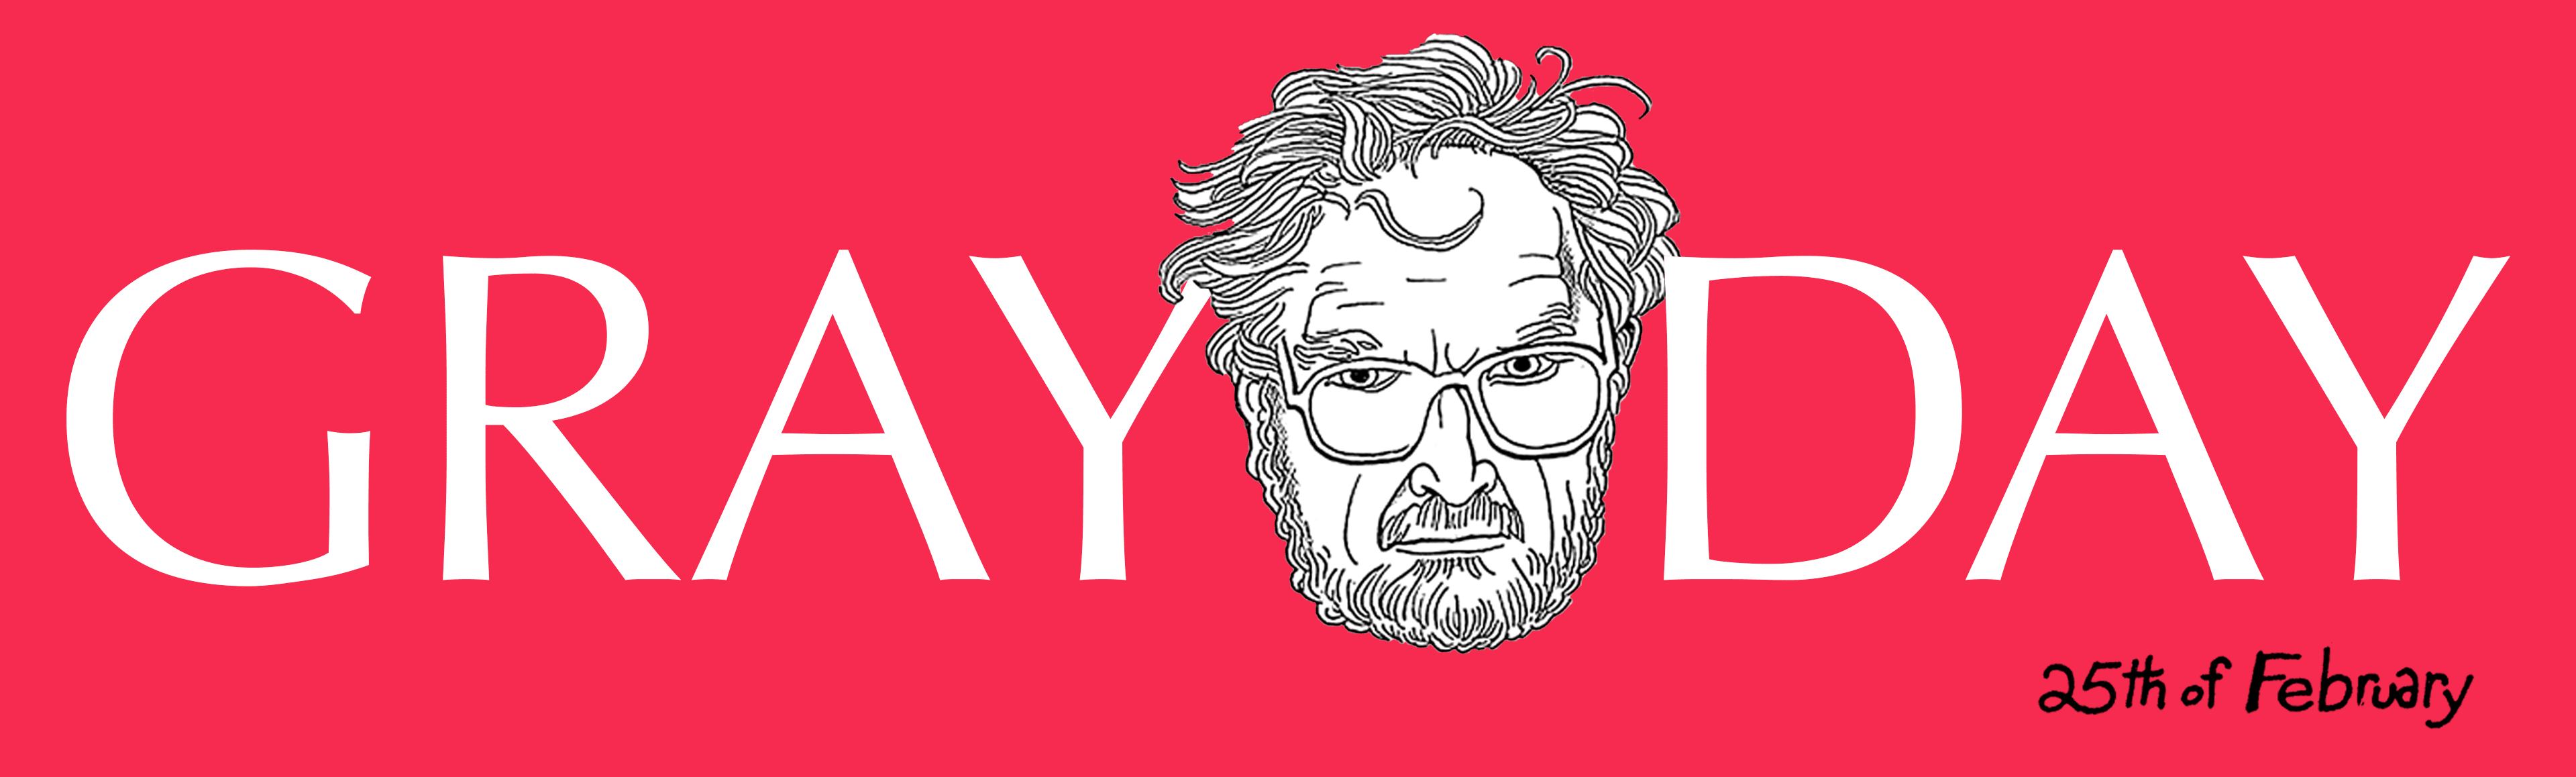 Gray Day. 25th of February. A header image with that as text and a self-portrait of Alasdair Gray.